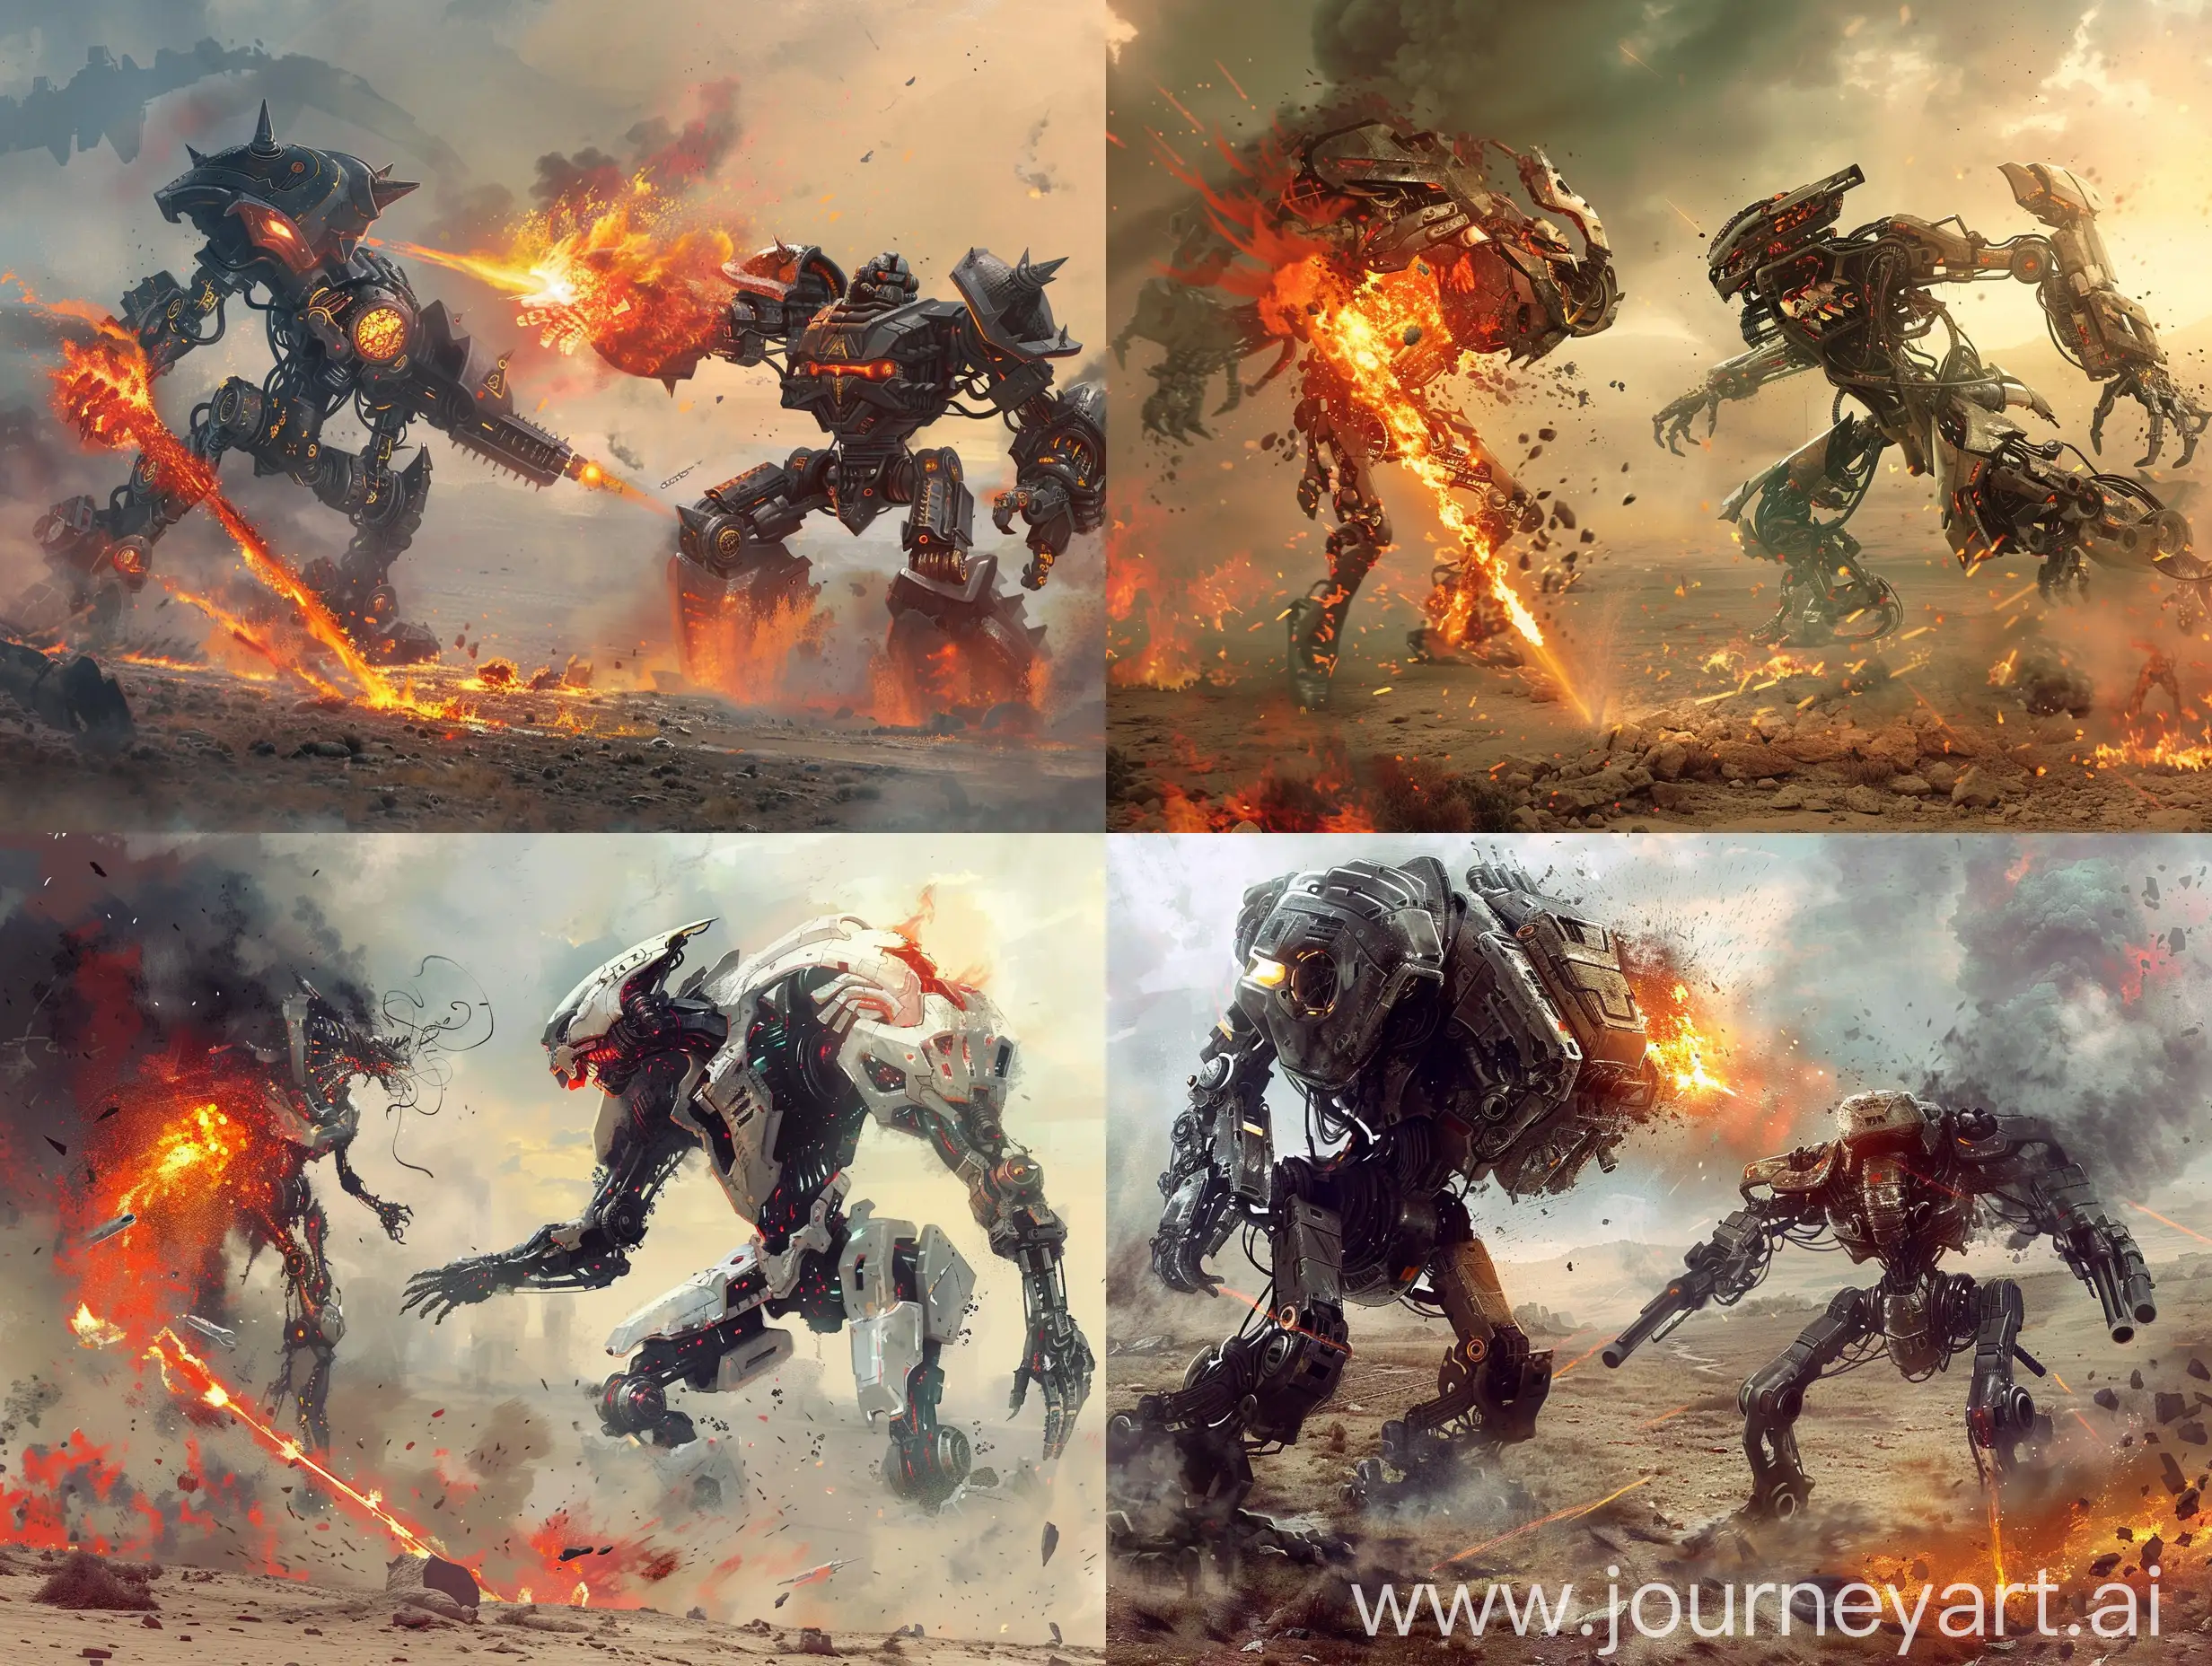 In a desolate and war-torn landscape, set the stage for an epic clash between two powerful robotic beings—one representing the fiery chaos of Hell and the other embodying the serene purity of Heaven. In a single, visually striking scene, depict the intense confrontation between these celestial machines. Consider their distinct features, weaponry, and the environment around them as they engage in a fierce struggle for dominance. Capture the essence of their conflicting nature and the dramatic moment when the forces of Hell and Heaven collide in a dazzling display of futuristic warfare.